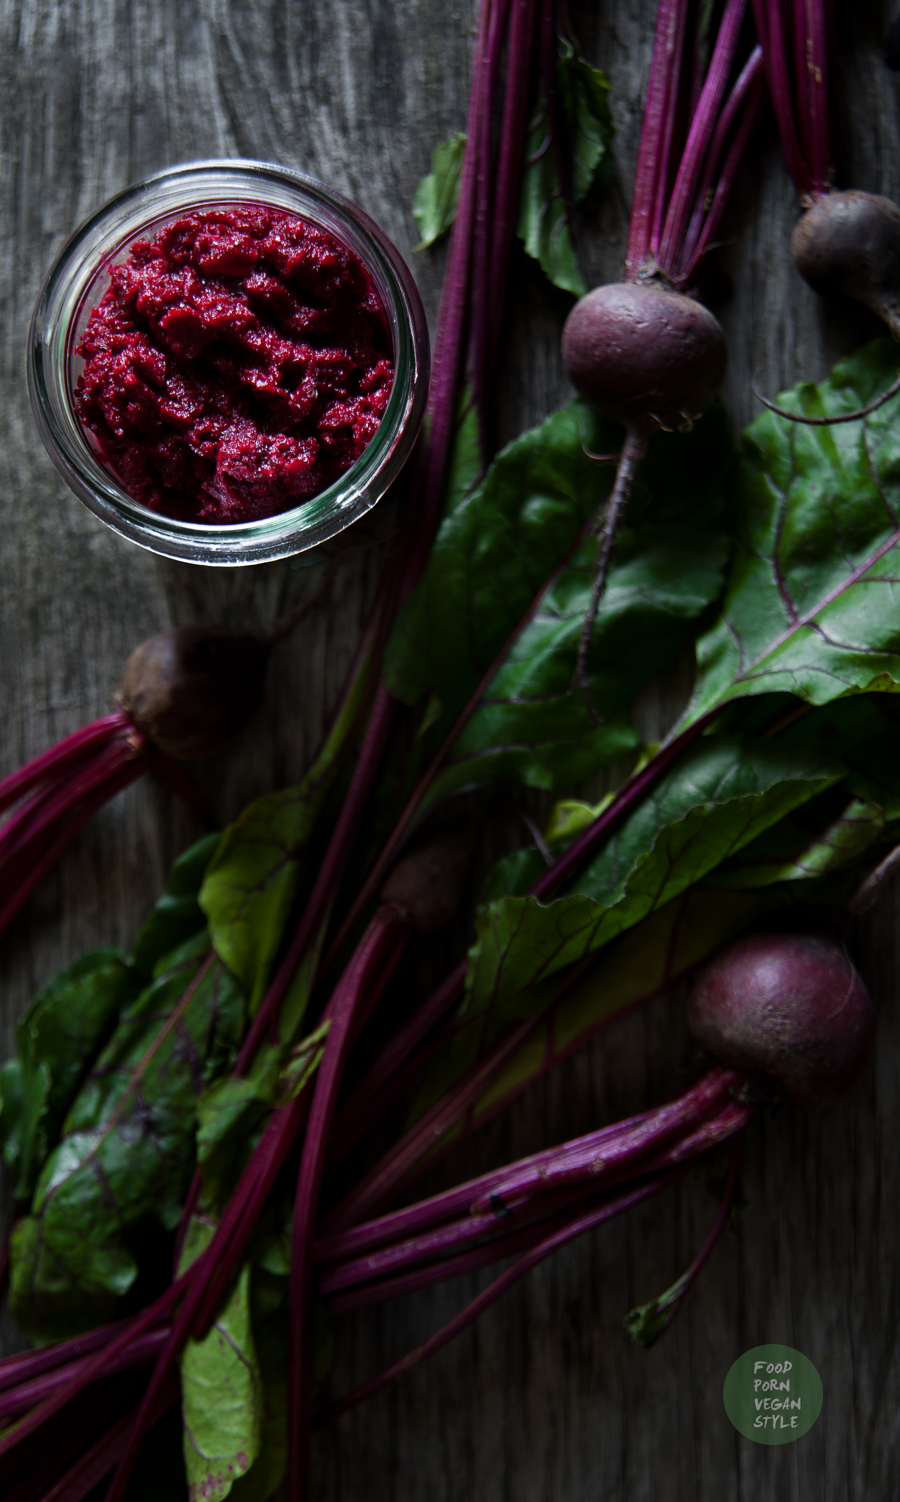 Young beetroot puree with horseradish